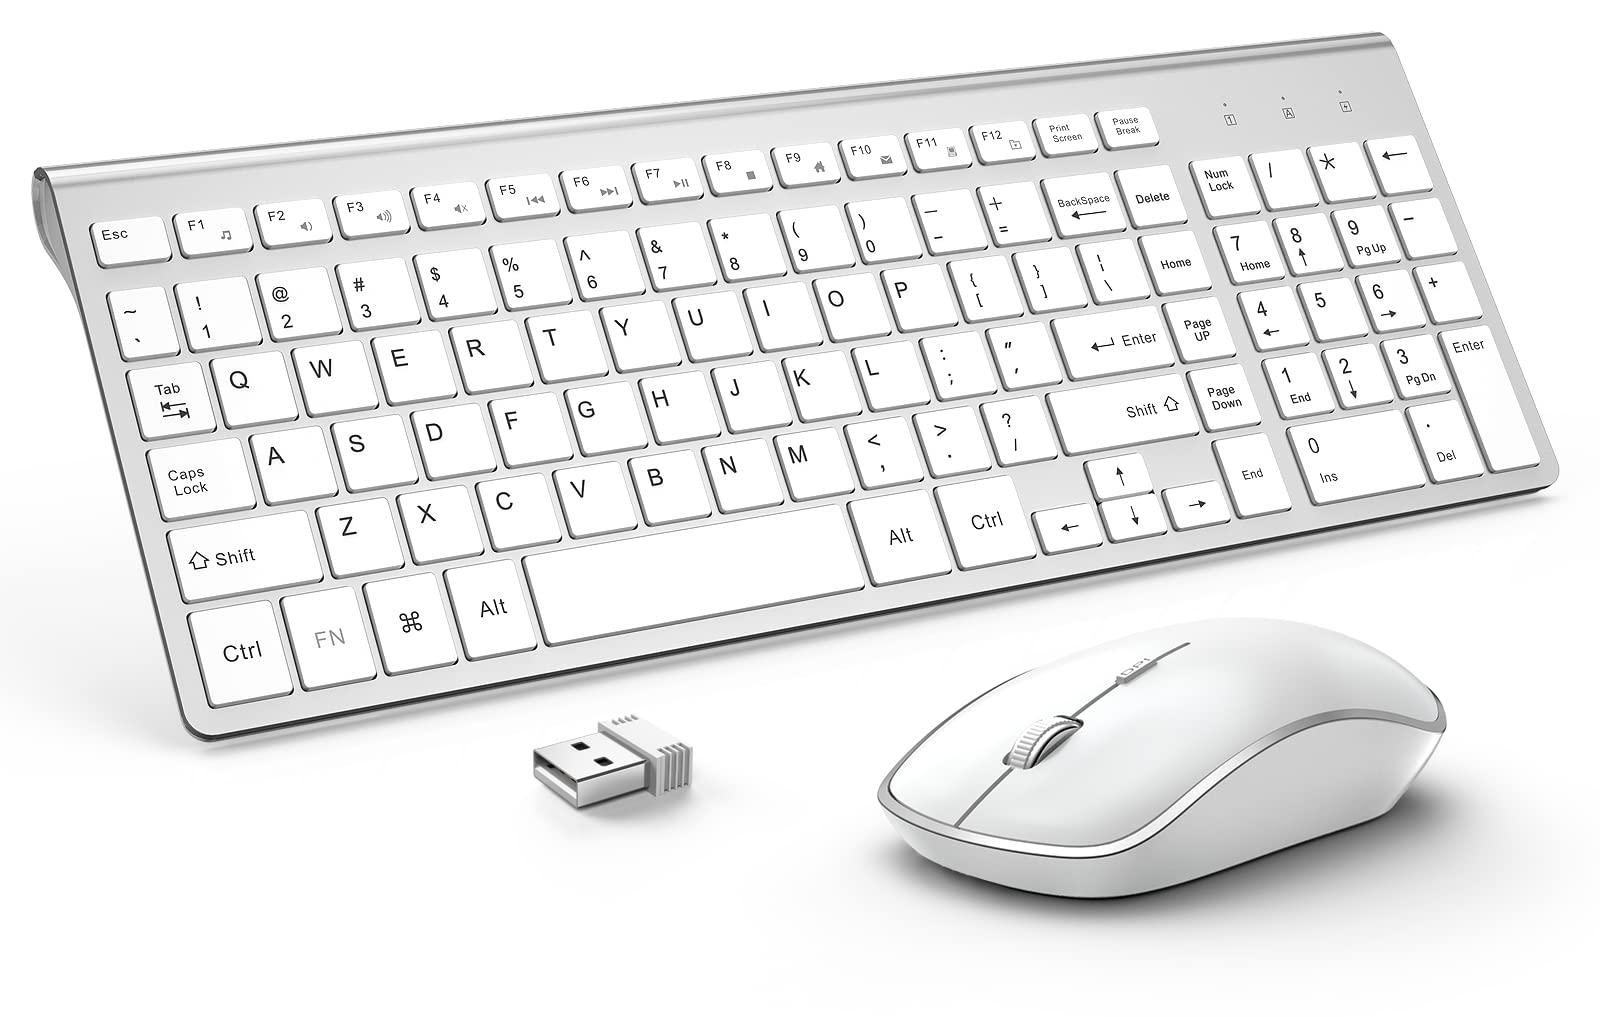 Wireless Keyboard and Mouse, J JOYACCESS USB Slim Wireless Keyboard Mouse with Numeric Keypad Compatible with iMac Mac PC Laptop Tablet Computer Windows (Silver White)J JOYACCESS 1080P Webcam USB Webcam,Computer Microphone and Camera,Desktop Camera with Microphone for Computer/Video Calls Recording/Studying/Game/Conferencing on Zoom/YouTube/Skype
